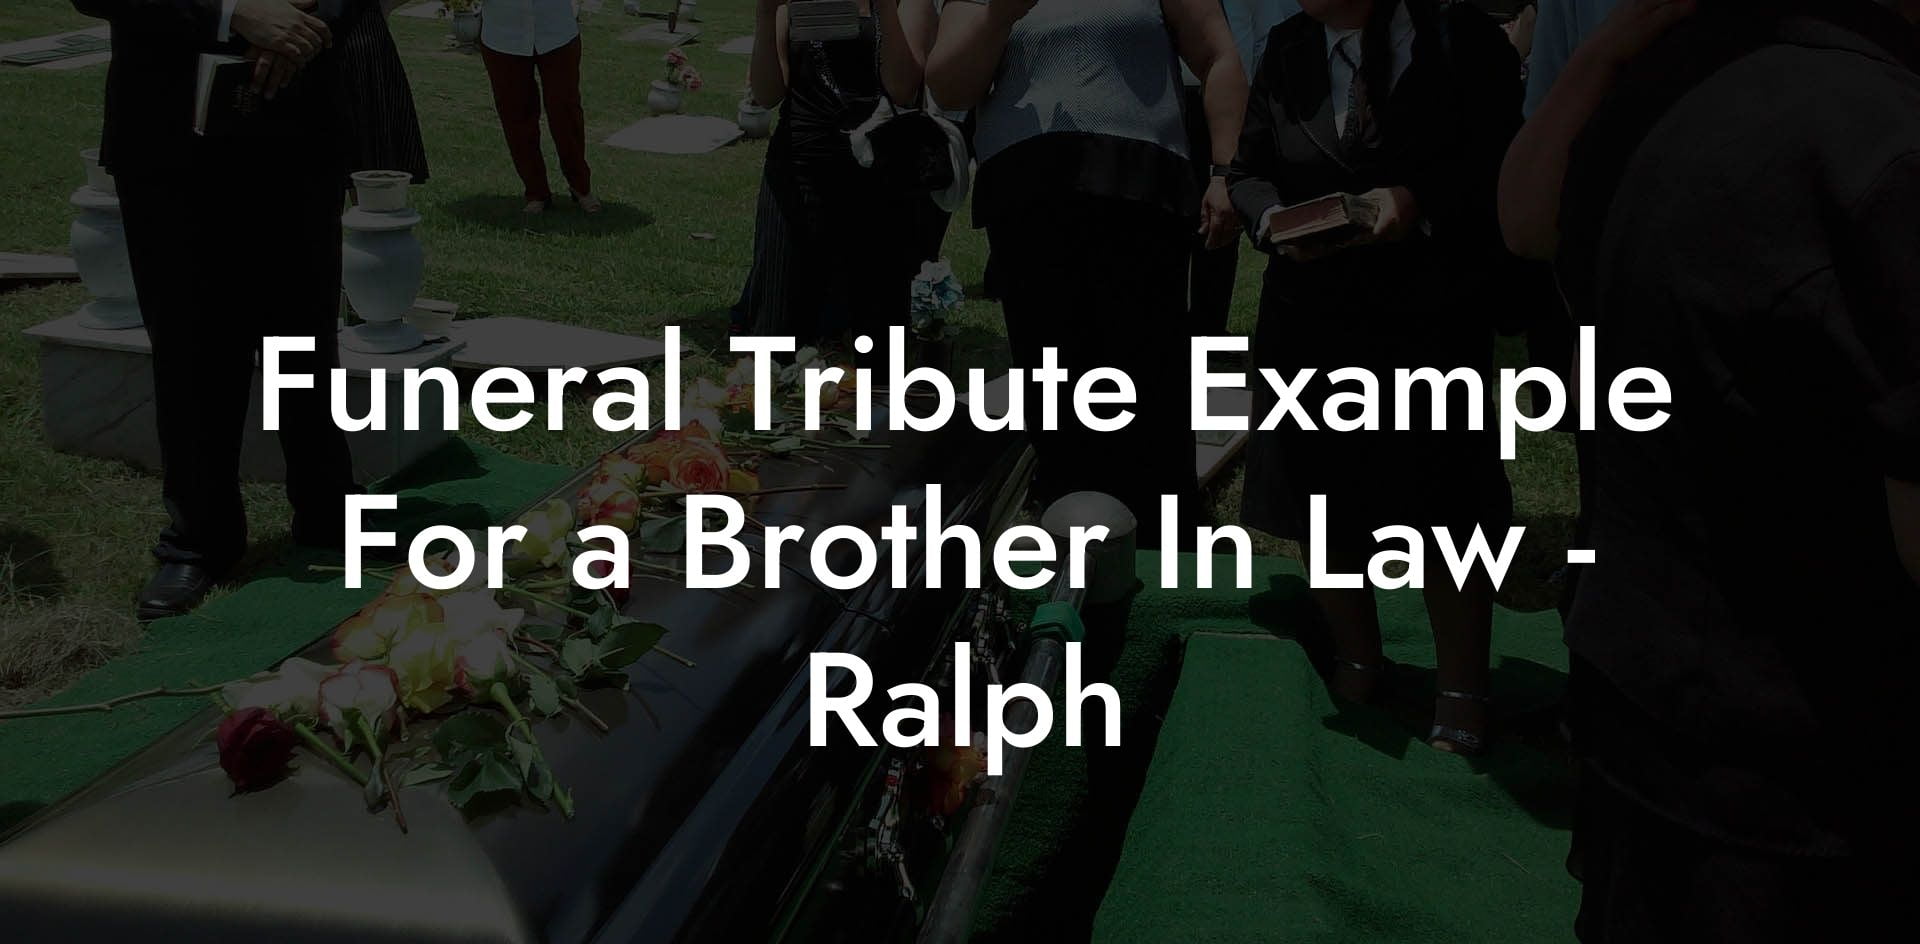 Funeral Tribute Example For a Brother In Law - Ralph